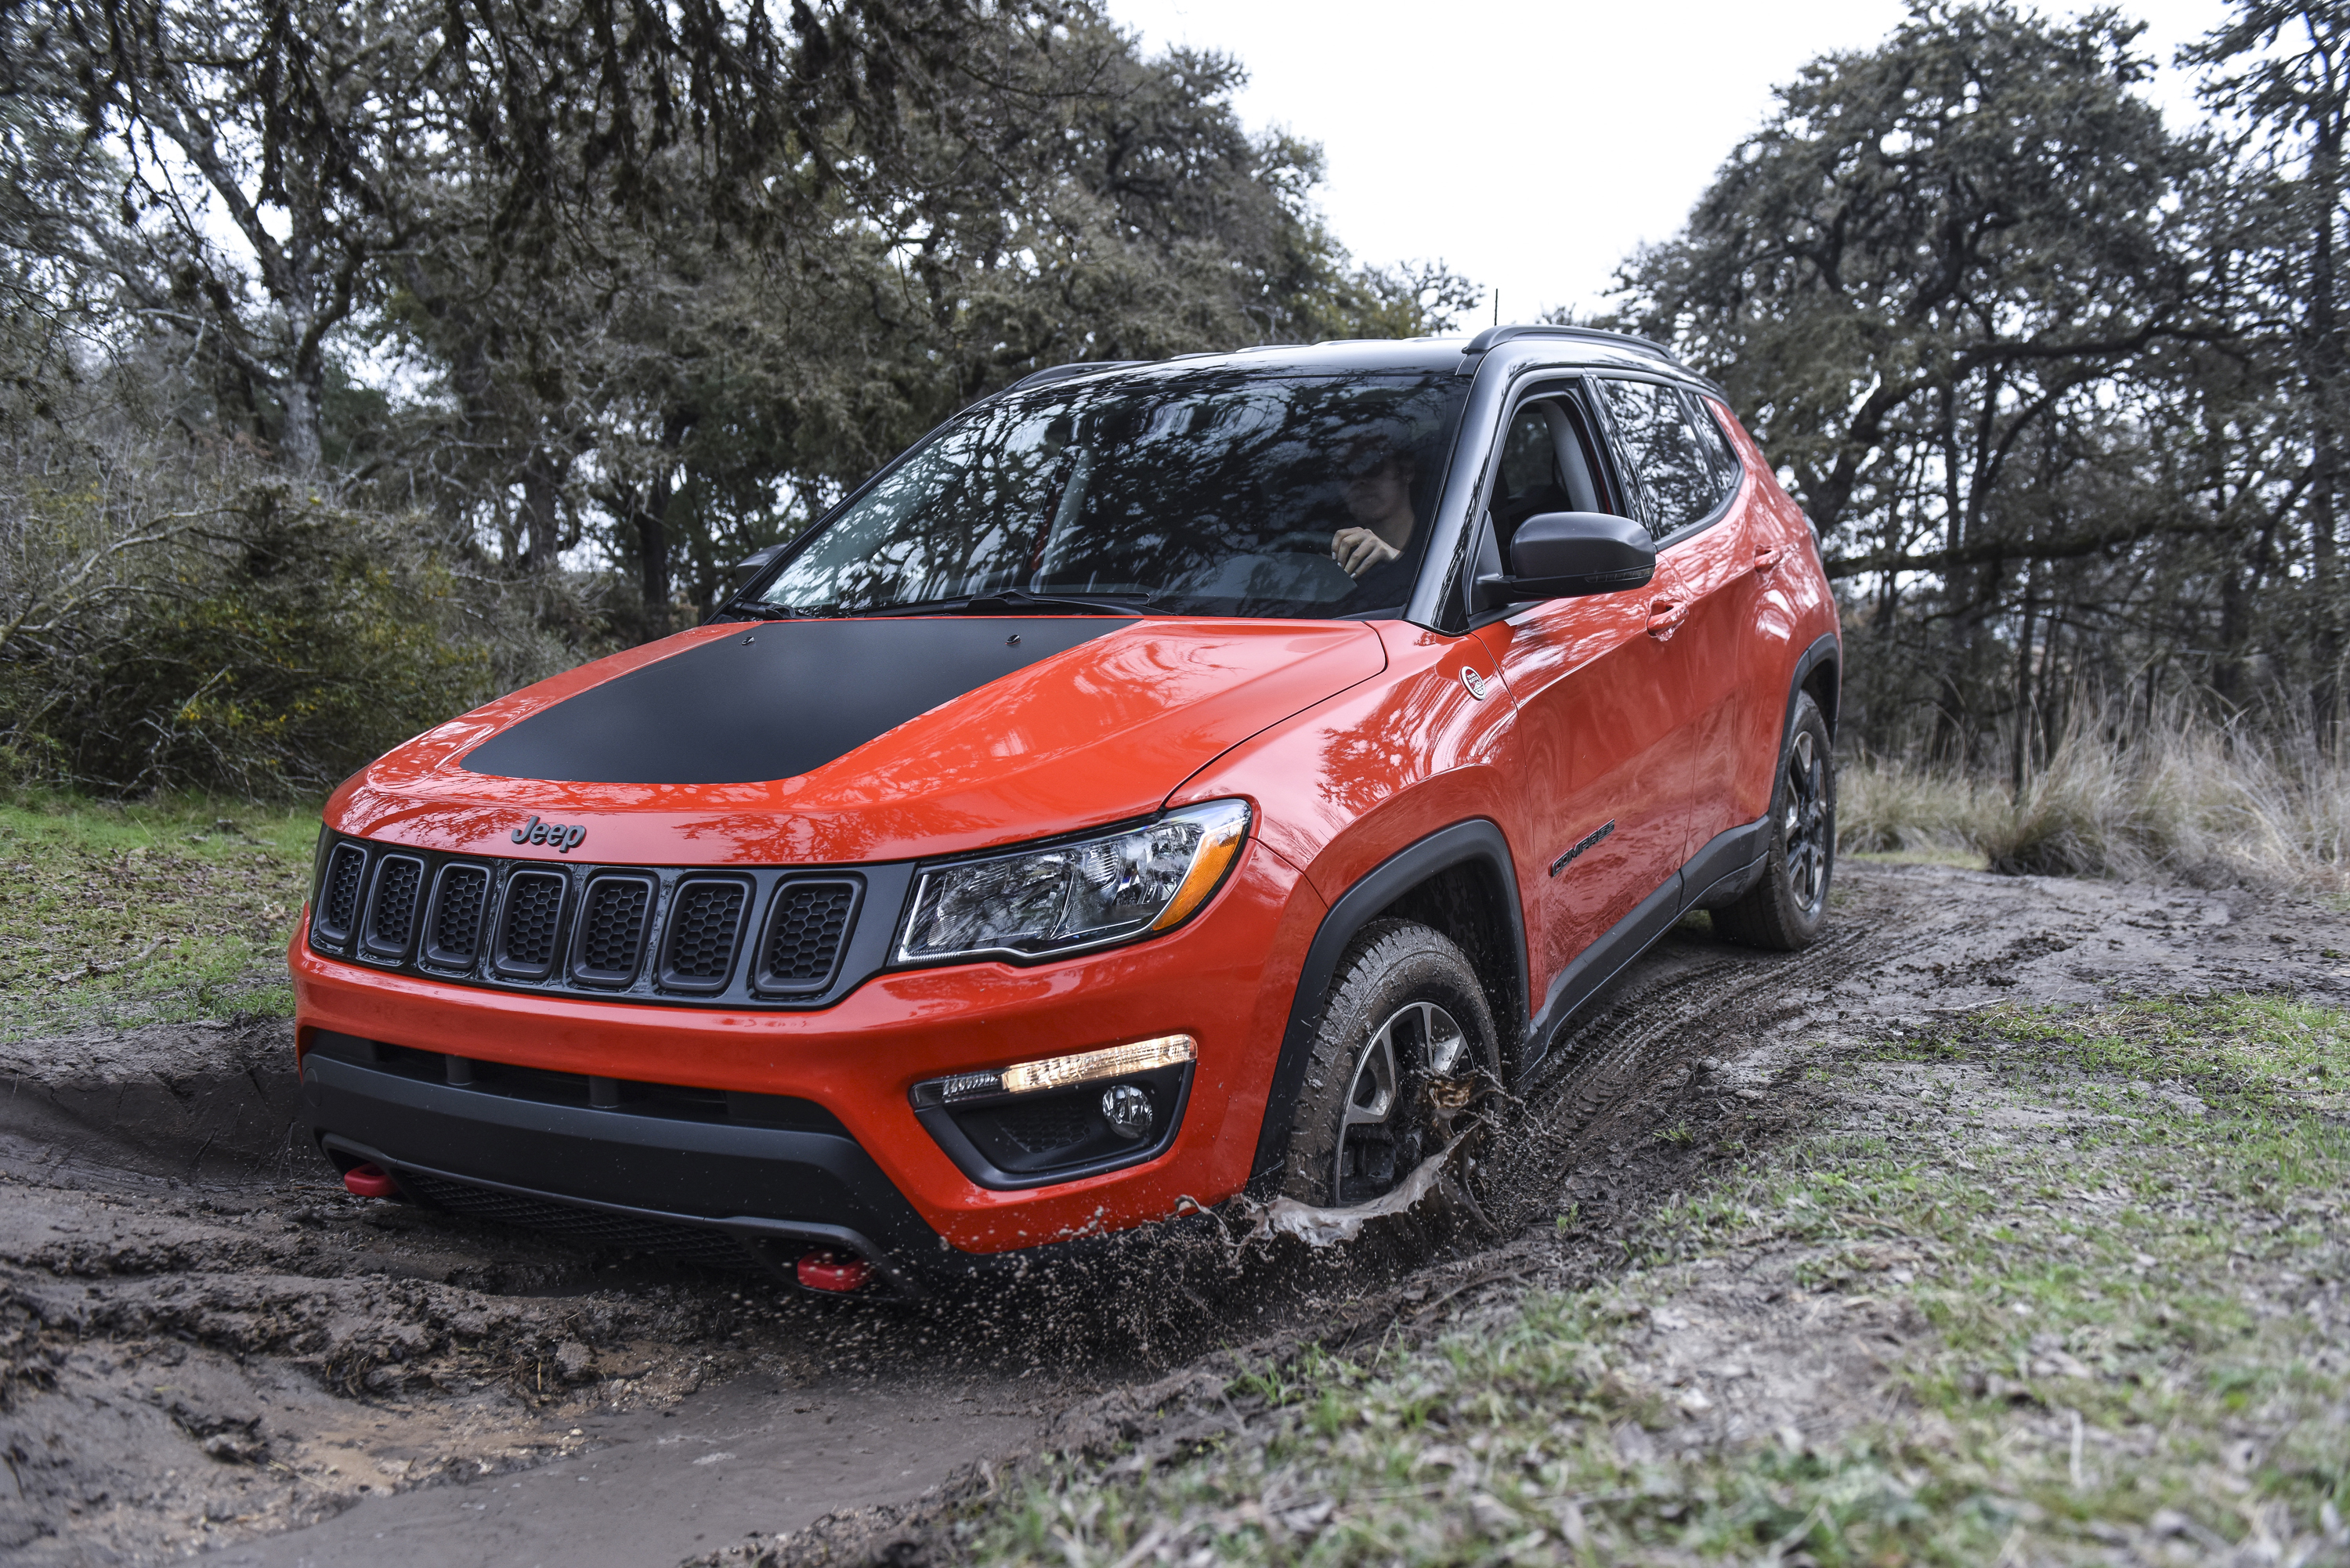 2019 Jeep Compass off-roading in mud